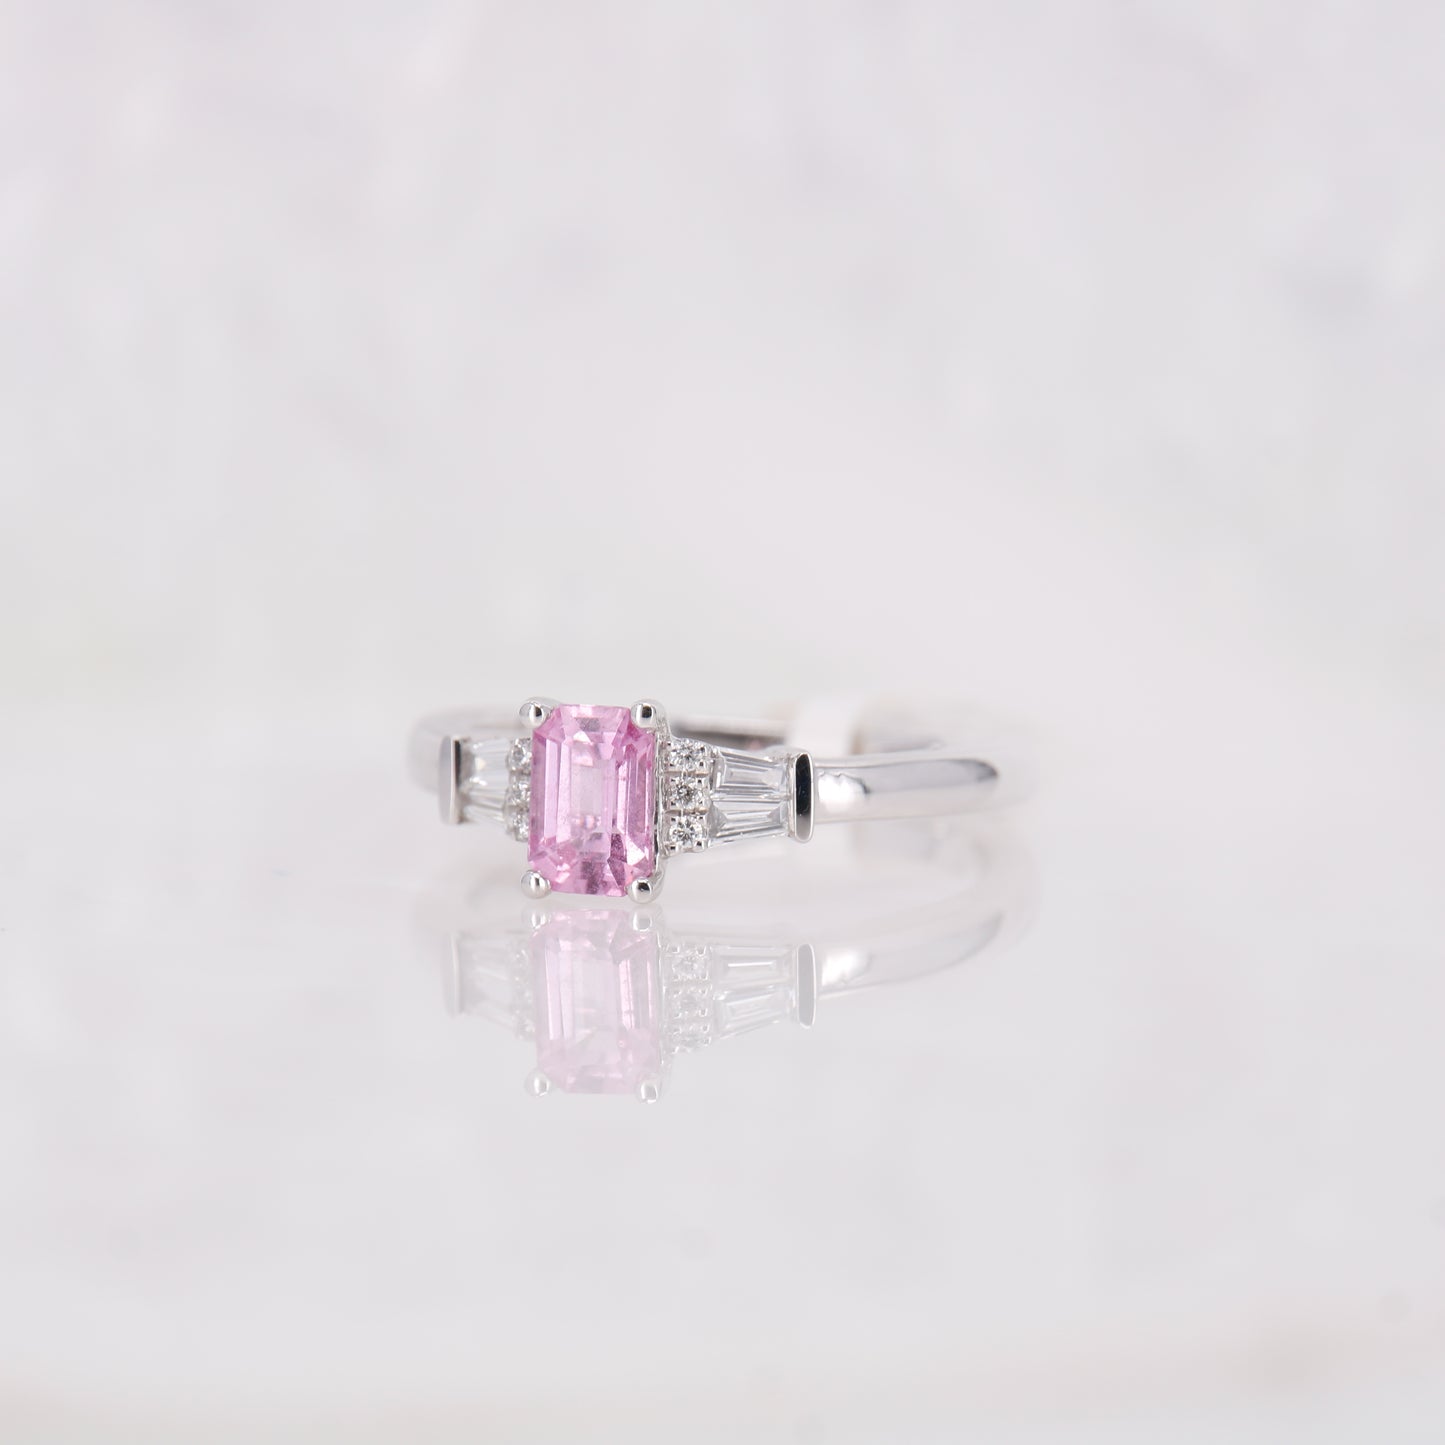 Pink Sapphire and Diamond Ring set in Platinum. Tapered baguette side stones.